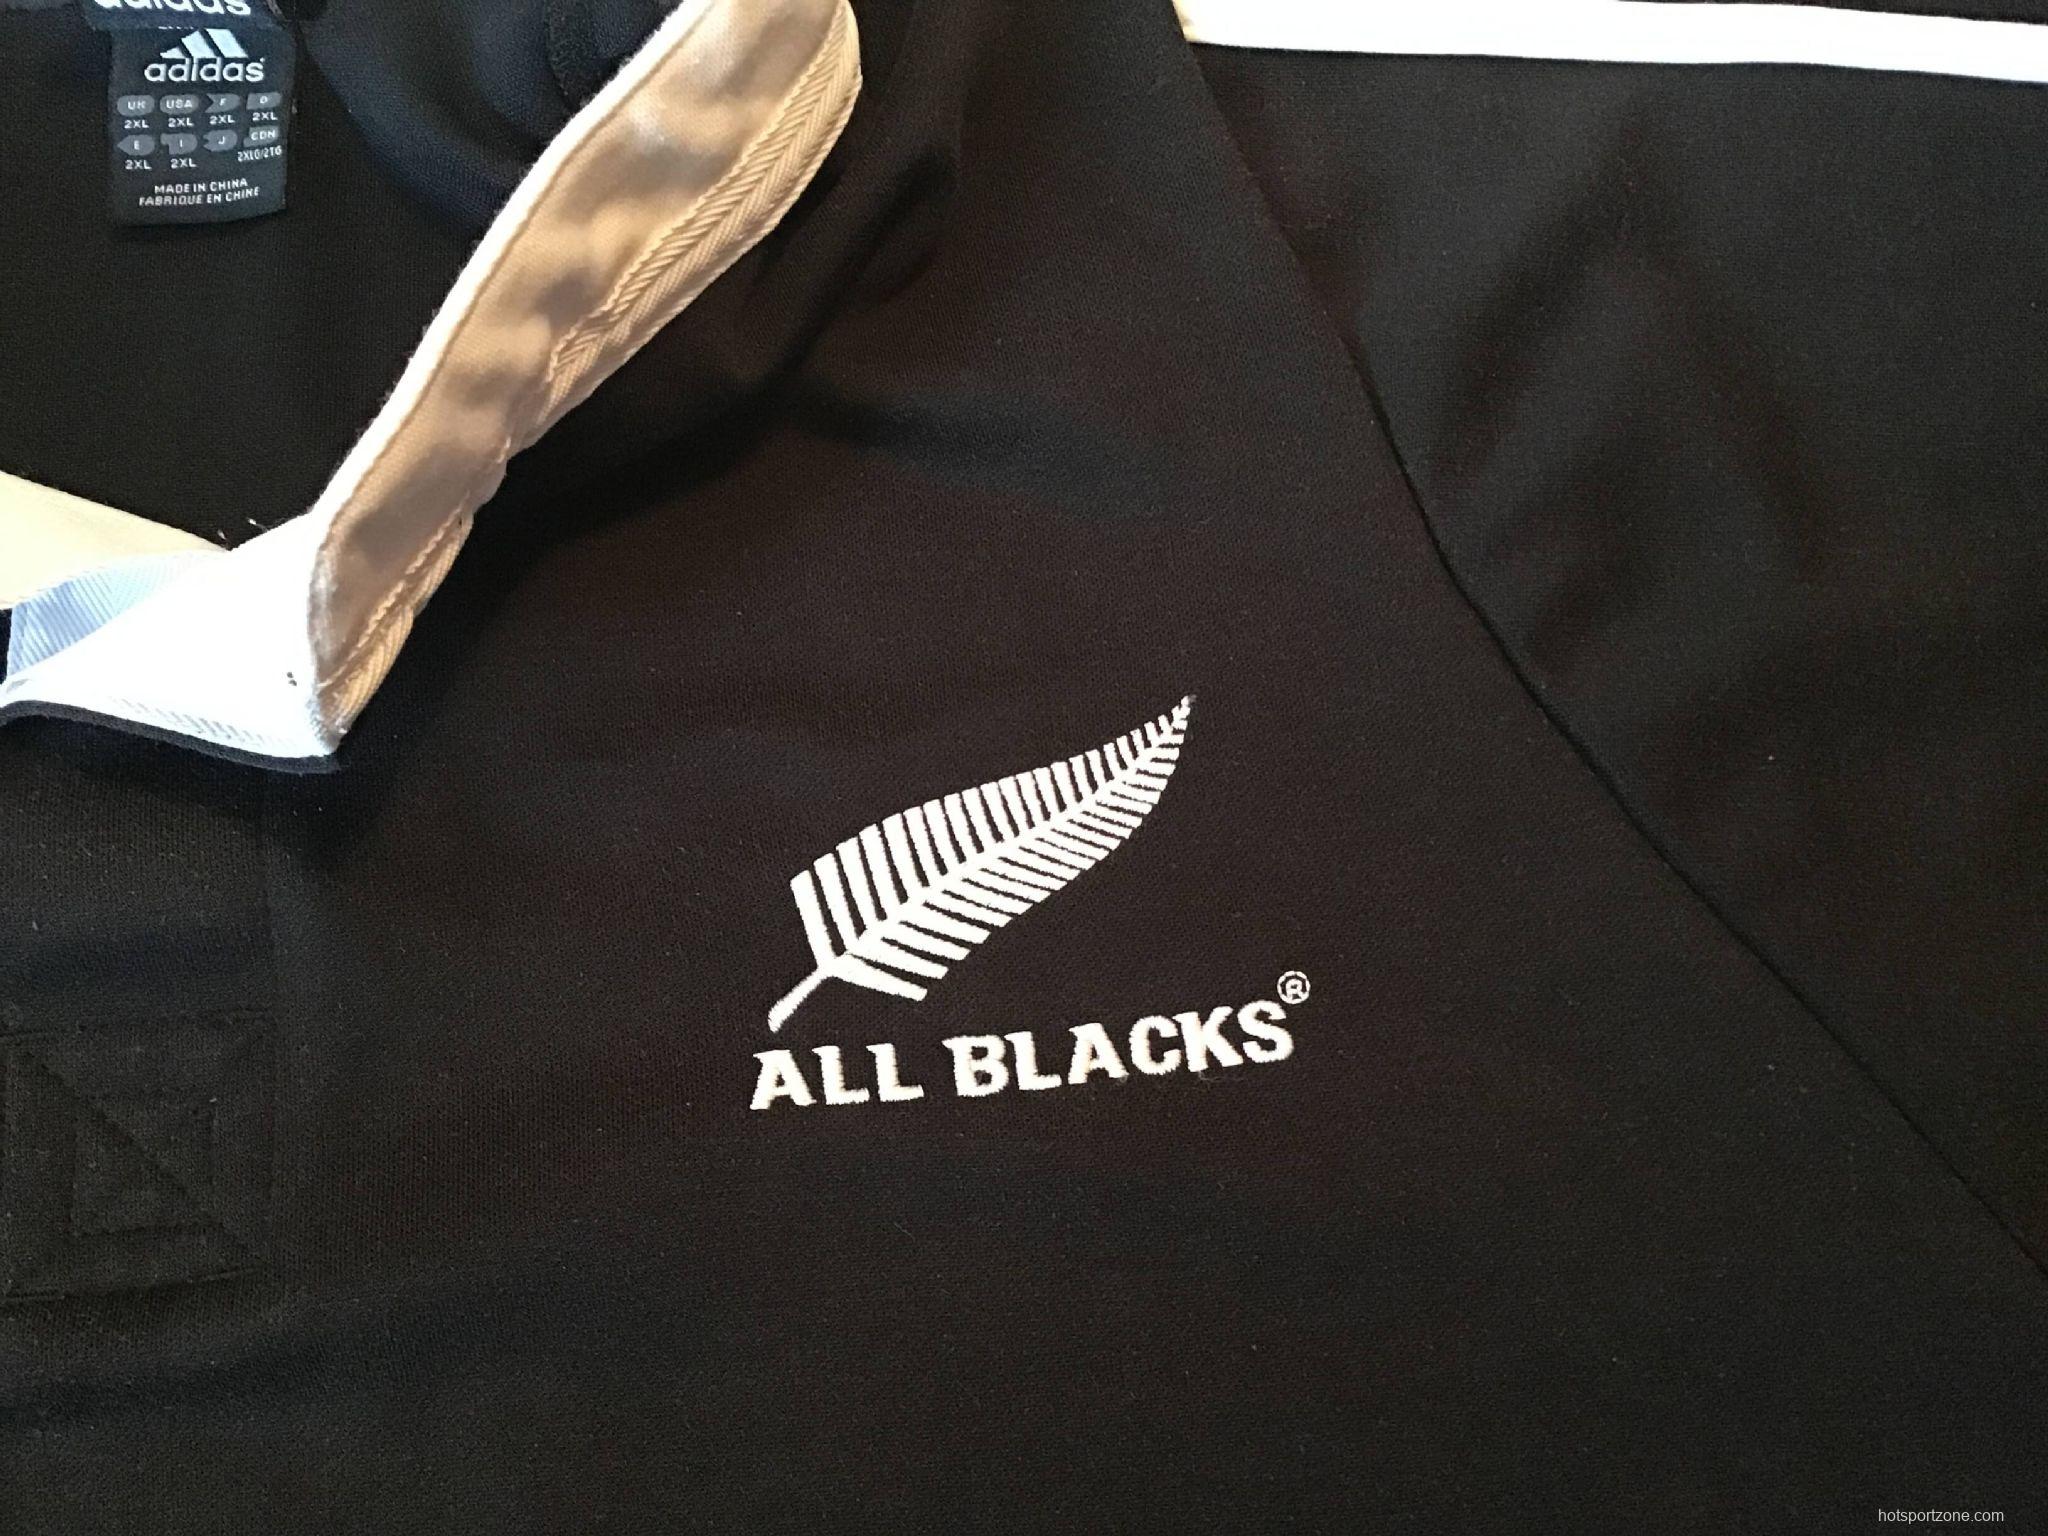 New Zealand 2003-2004 Men's Retro Home Rugby Jersey